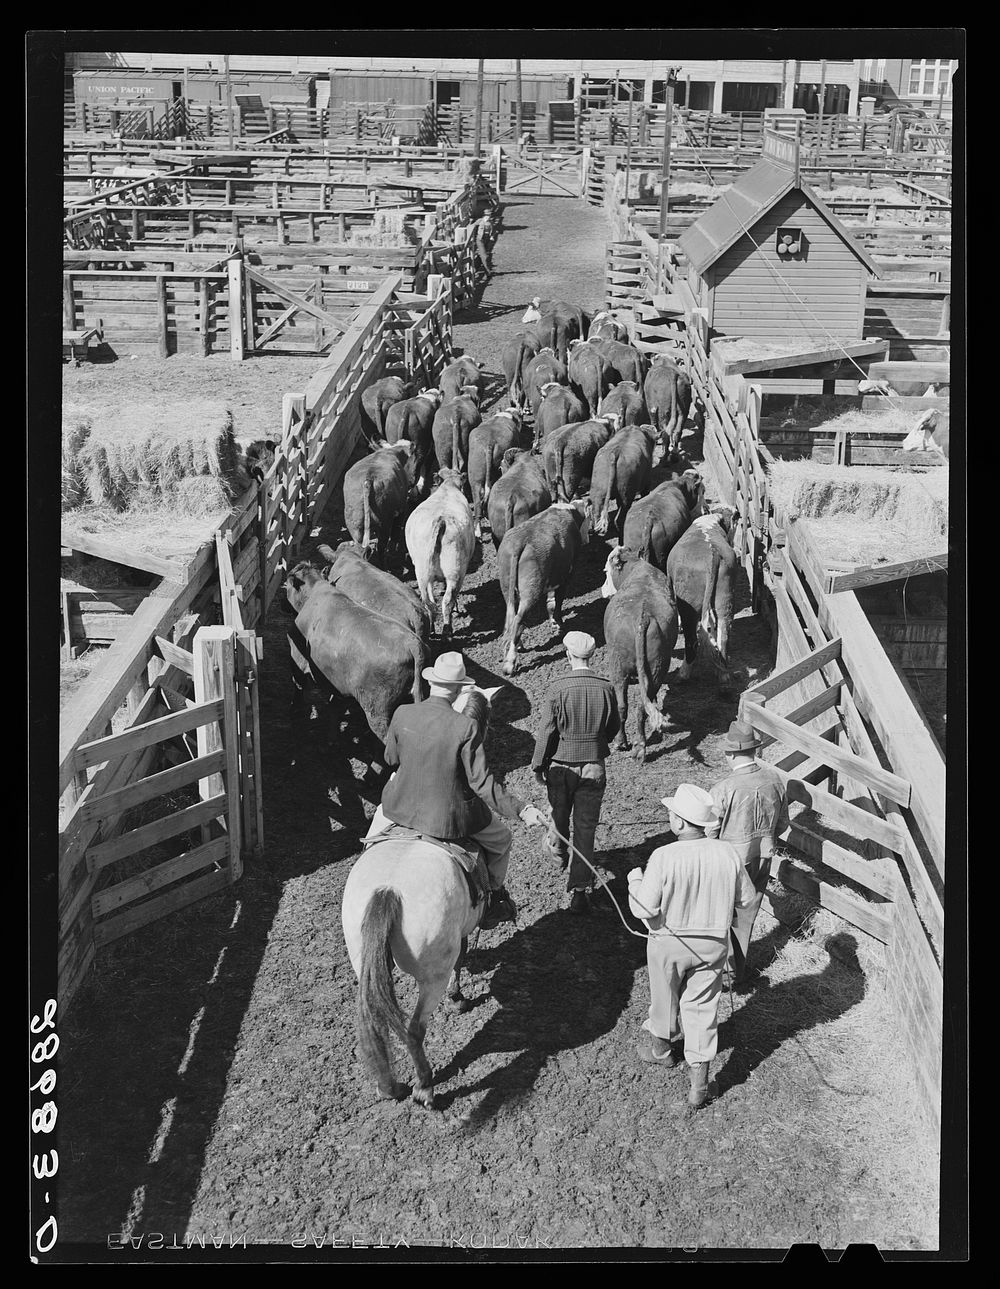 Driving cattle. Stockyards, Denver, Colorado. Sourced from the Library of Congress.